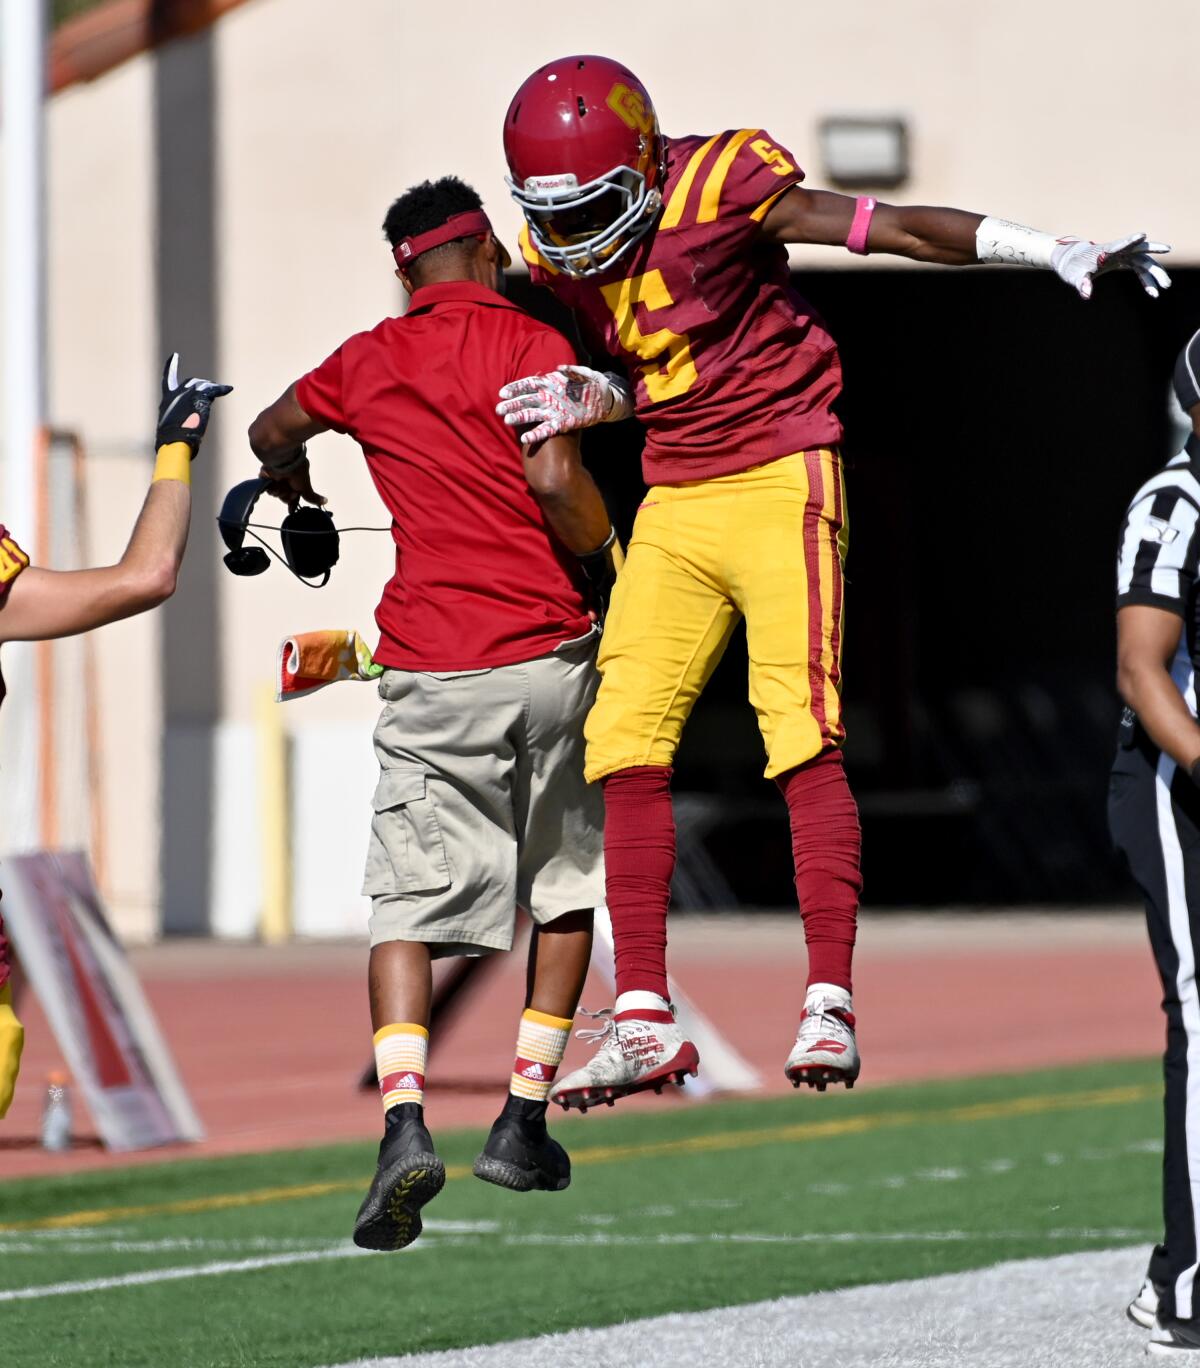 Torres Ingraham #5 of Glendale Community College celebrates with a coach after a touchdown against against Compton In the second half of a football game at Glendale Community College on Saturday, Oct. 19, 2019 in Glendale, California. (Photo by Libby Cline)